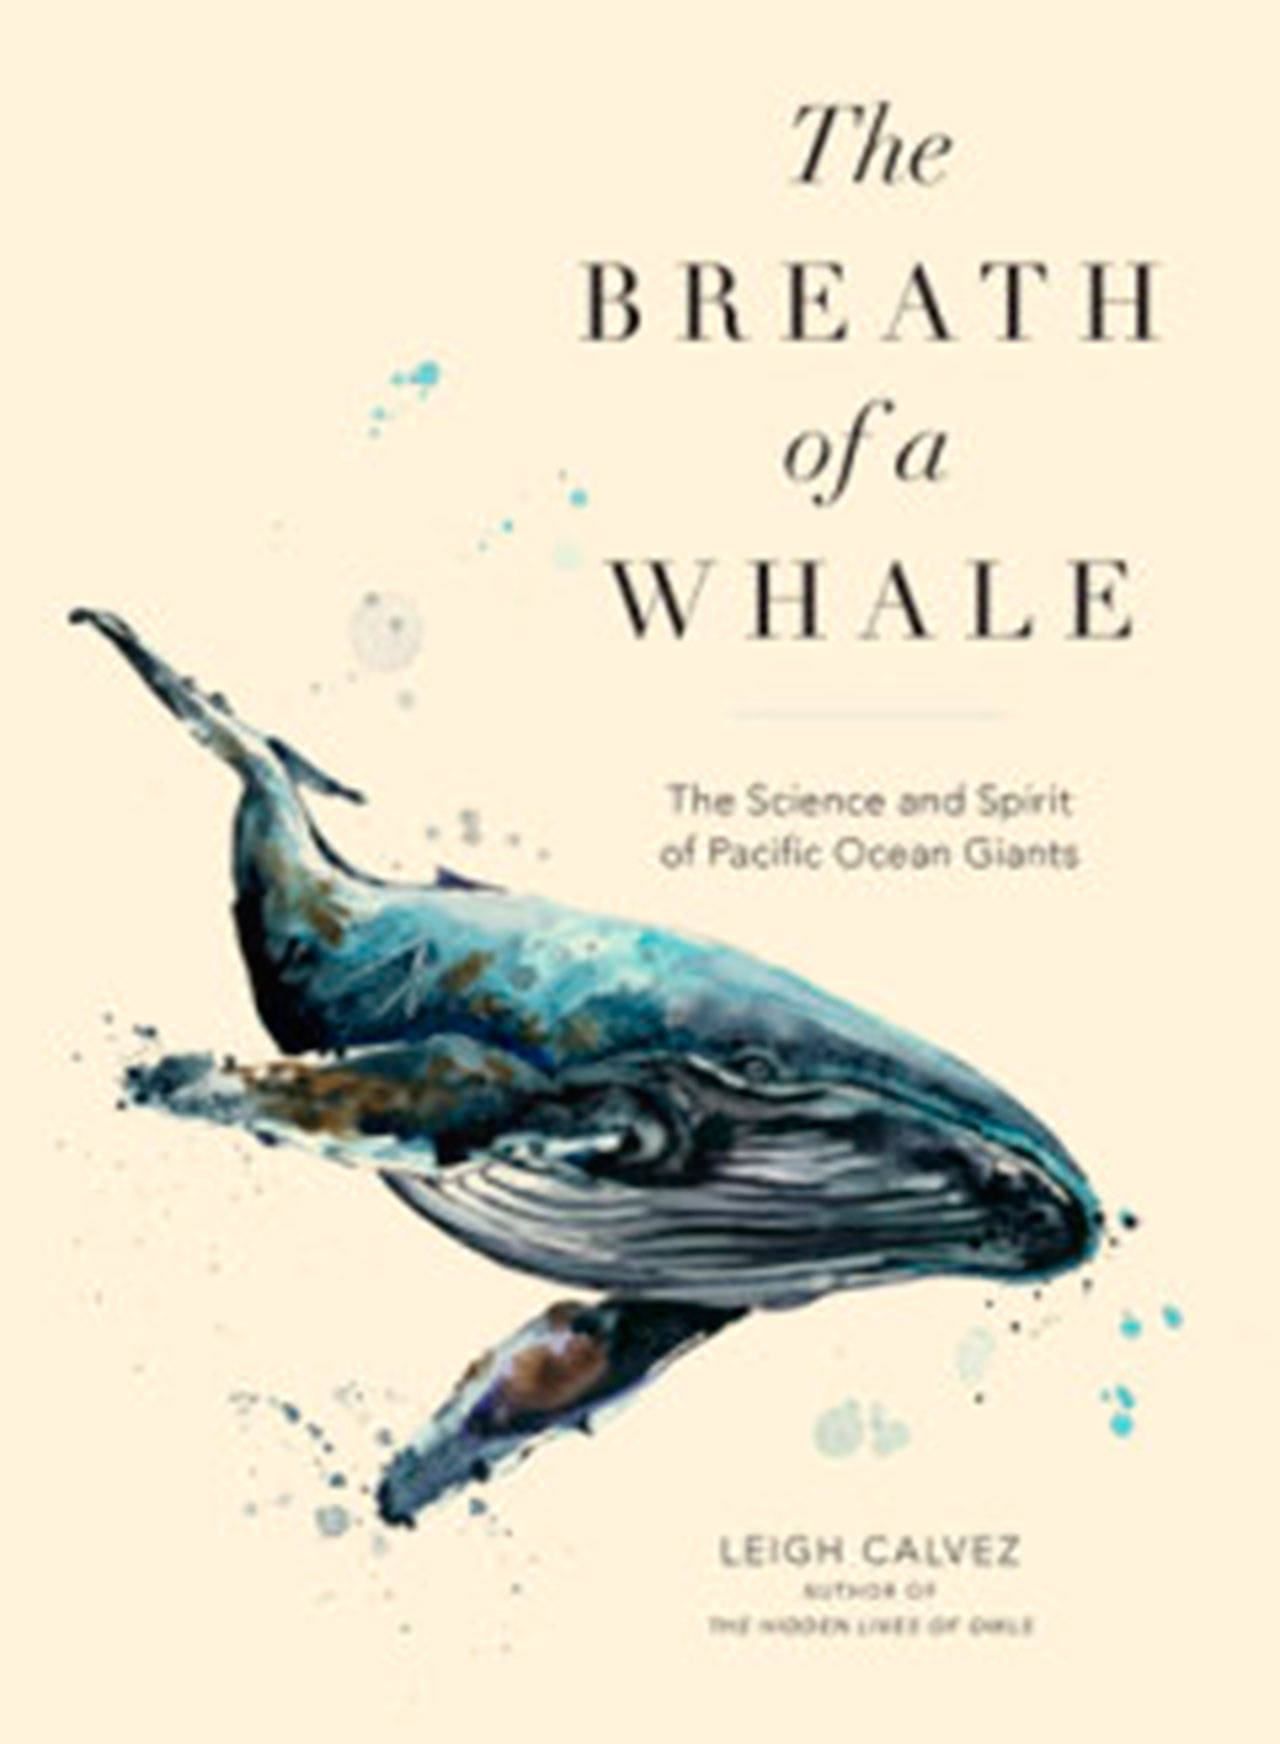 Image courtesy of Eagle Harbor Book Company | Join Leigh Calvez, naturalist and author of the New York Times-bestselling “The Hidden Lives of Owls” at 7 p.m. Thursday, March 7 at Eagle Harbor Book Company as she discusses her latest book, which goes deep to discover the elusive lives of whales in the Pacific Ocean.